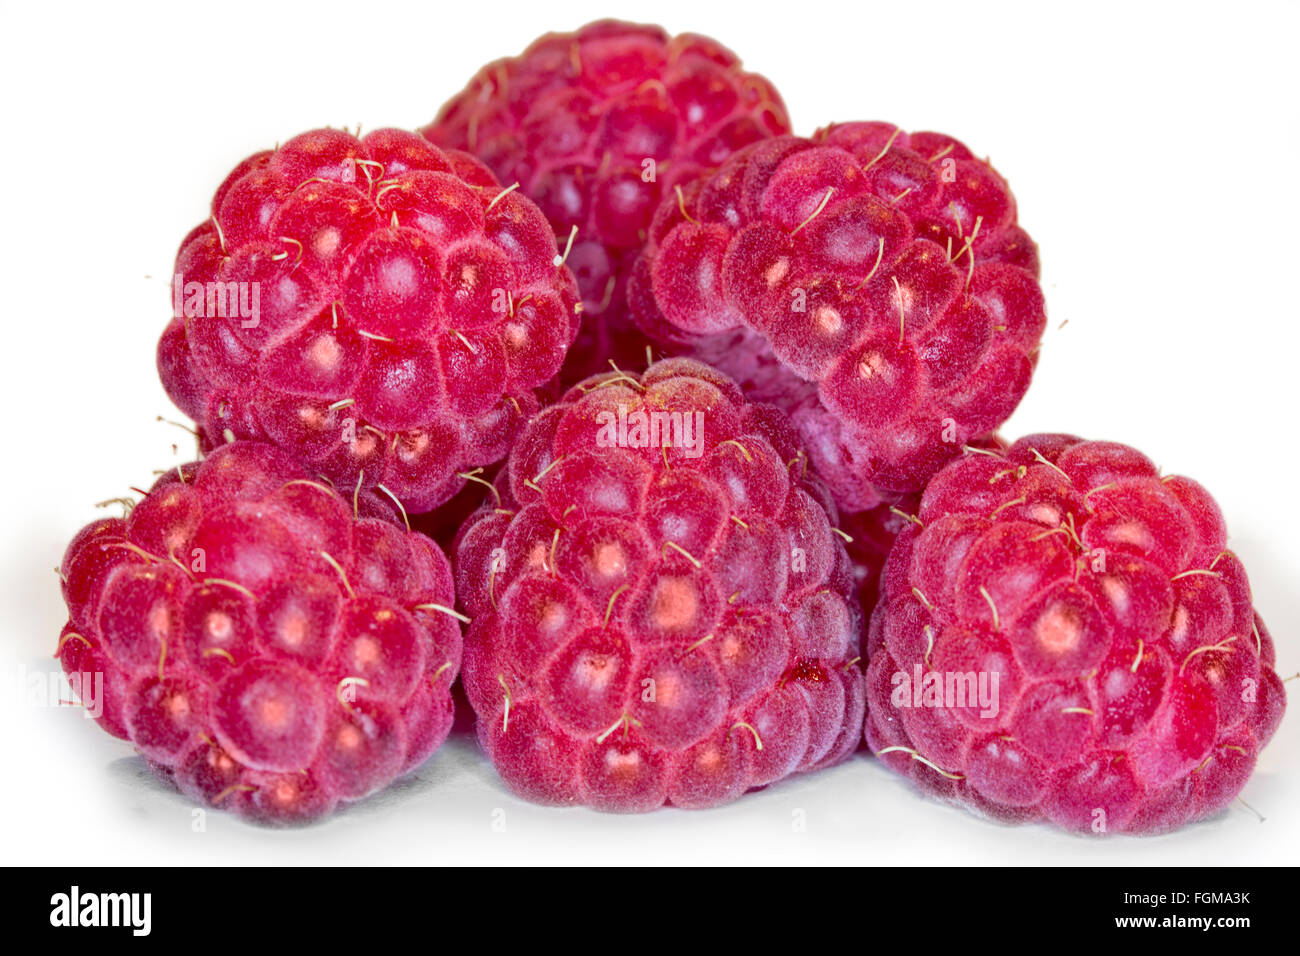 raspberry, macro, food, red, fruit, ripe, berry, drink, healthy, freshness, sweet, close-up, objects, group, backgrounds, fruits Stock Photo